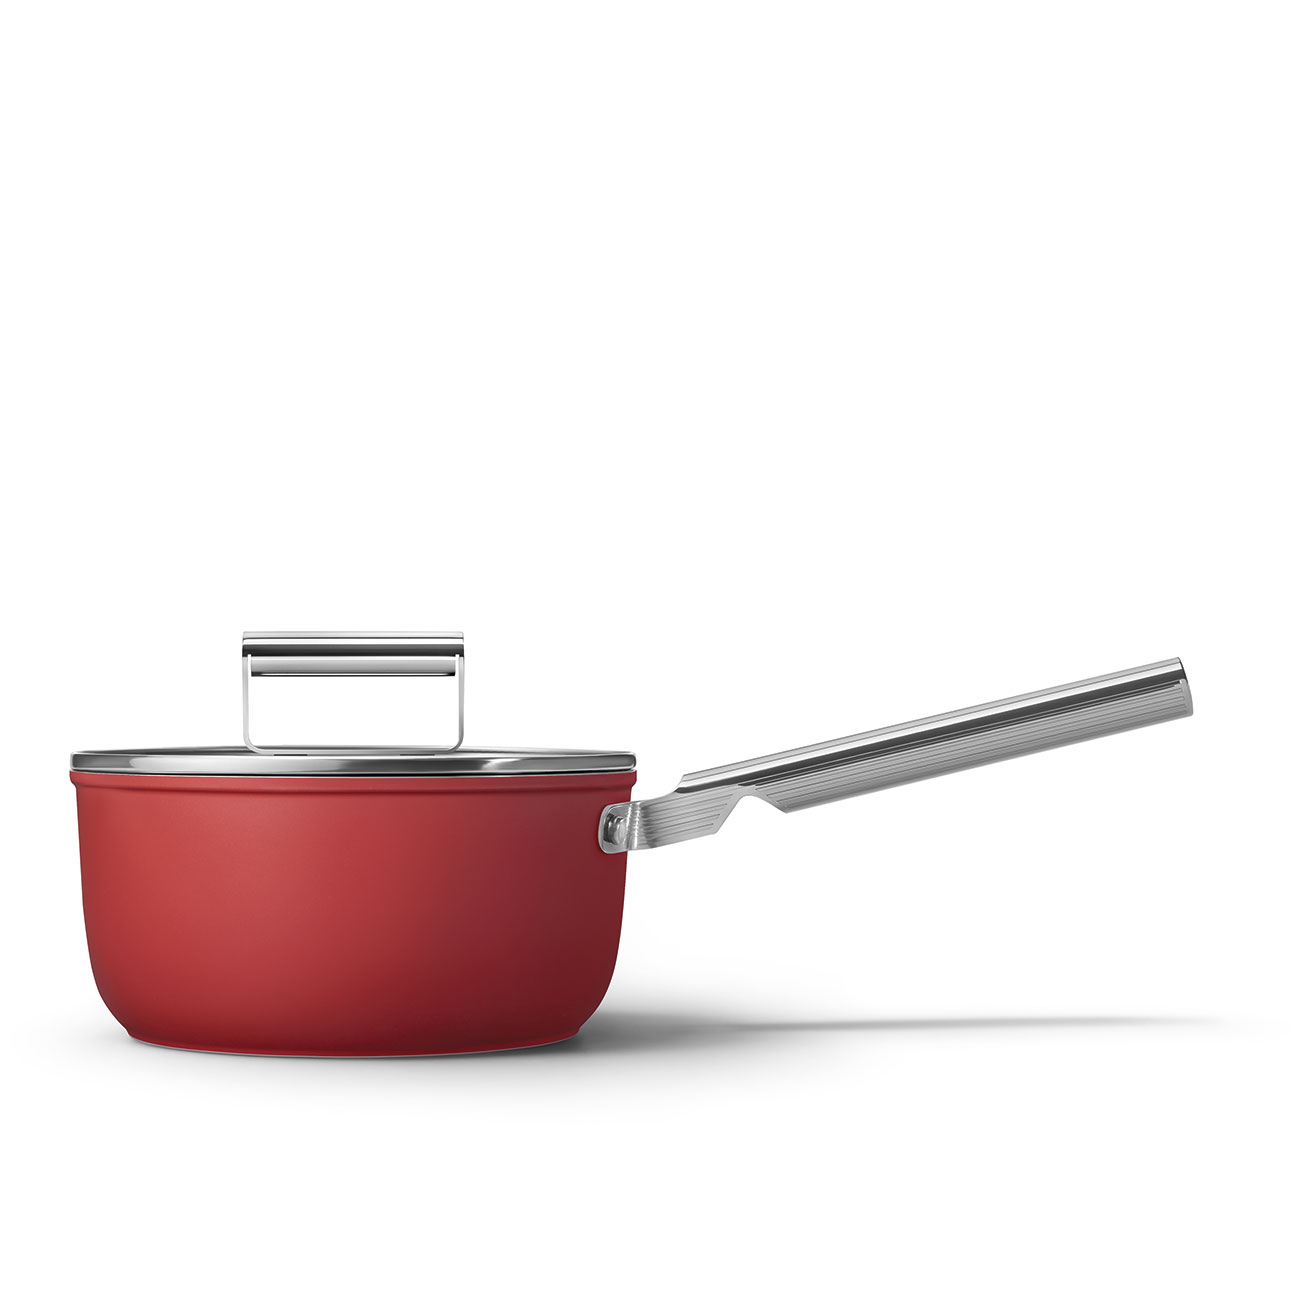 Smeg Red Non-stick Saucepan with glass lid and stainless steel handle_1